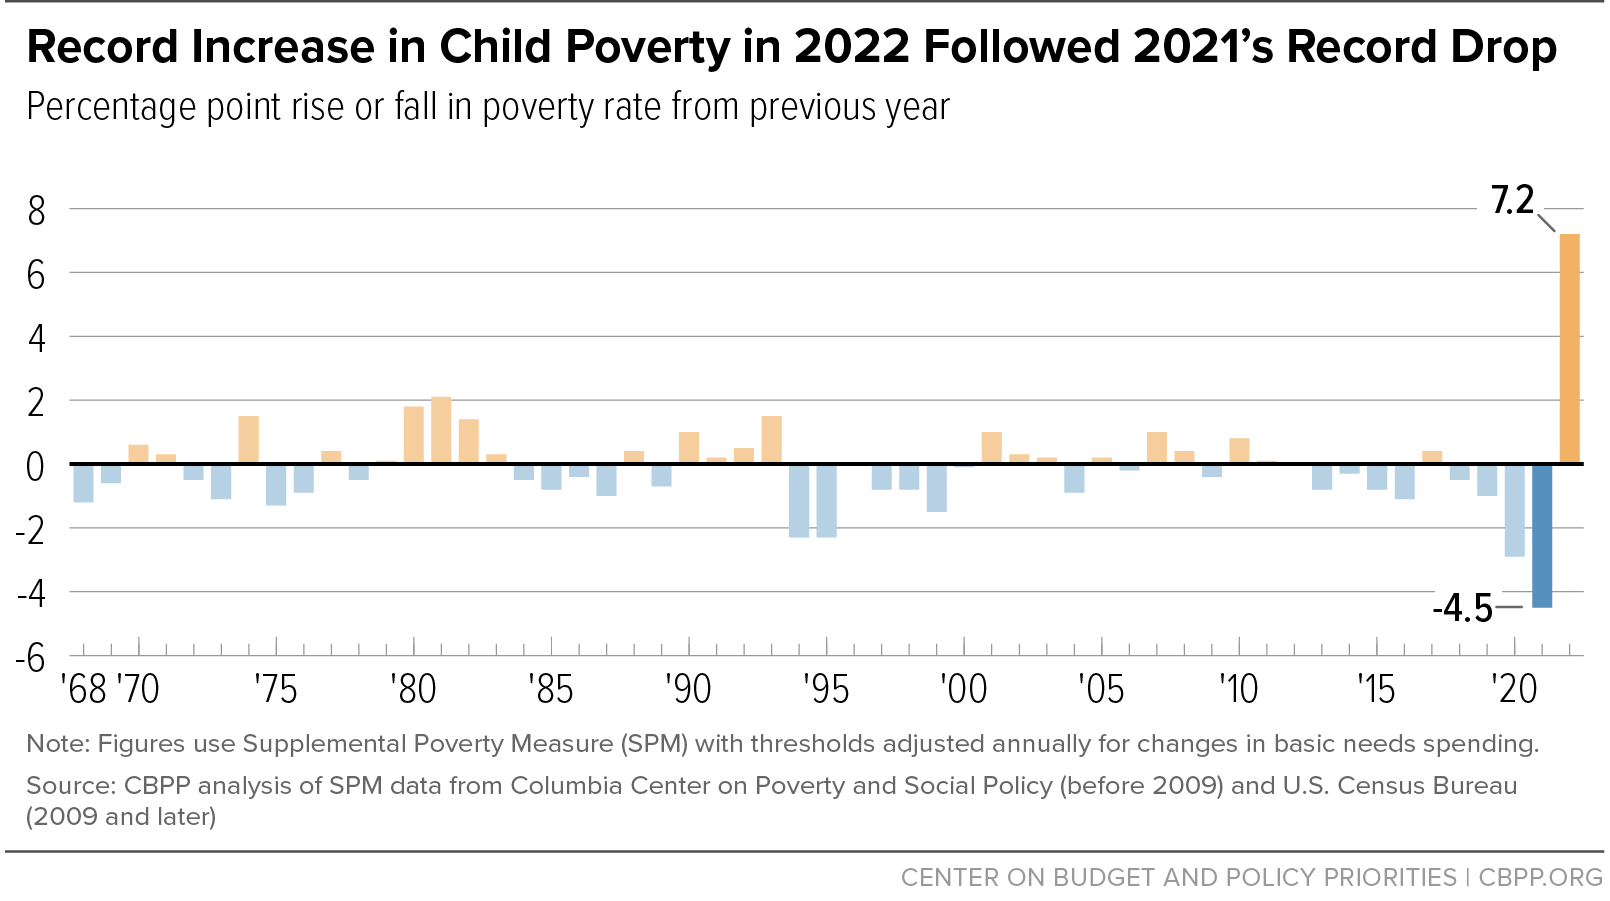 Record Increase in Child Poverty in 2022 Followed 2021's Record Drop